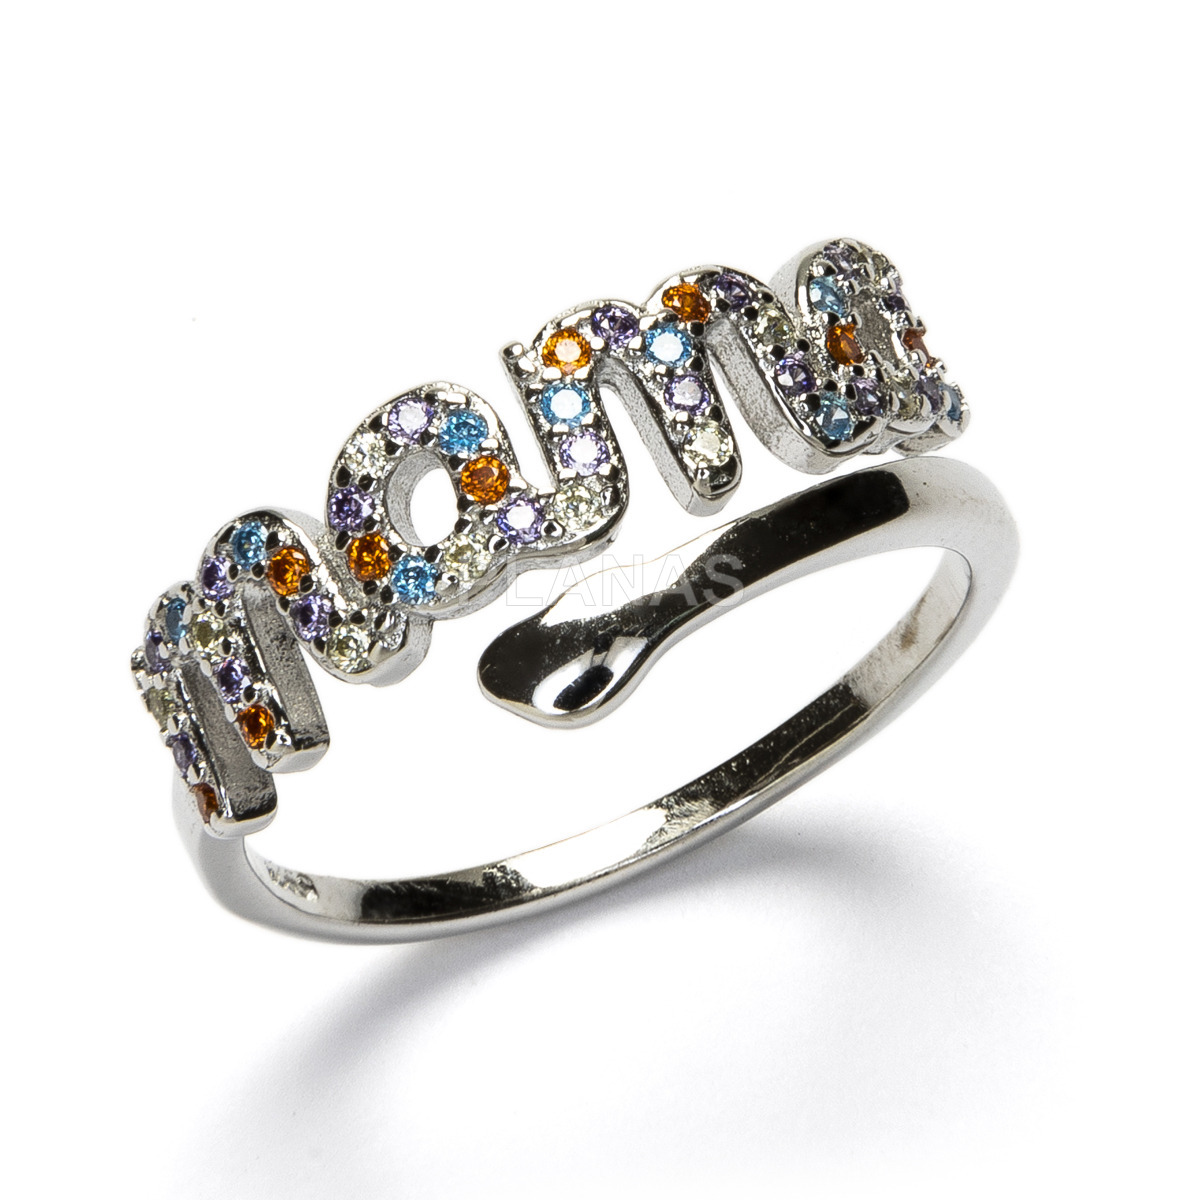 Ring in rhodium-plated sterling silver and colored zircons.mama.